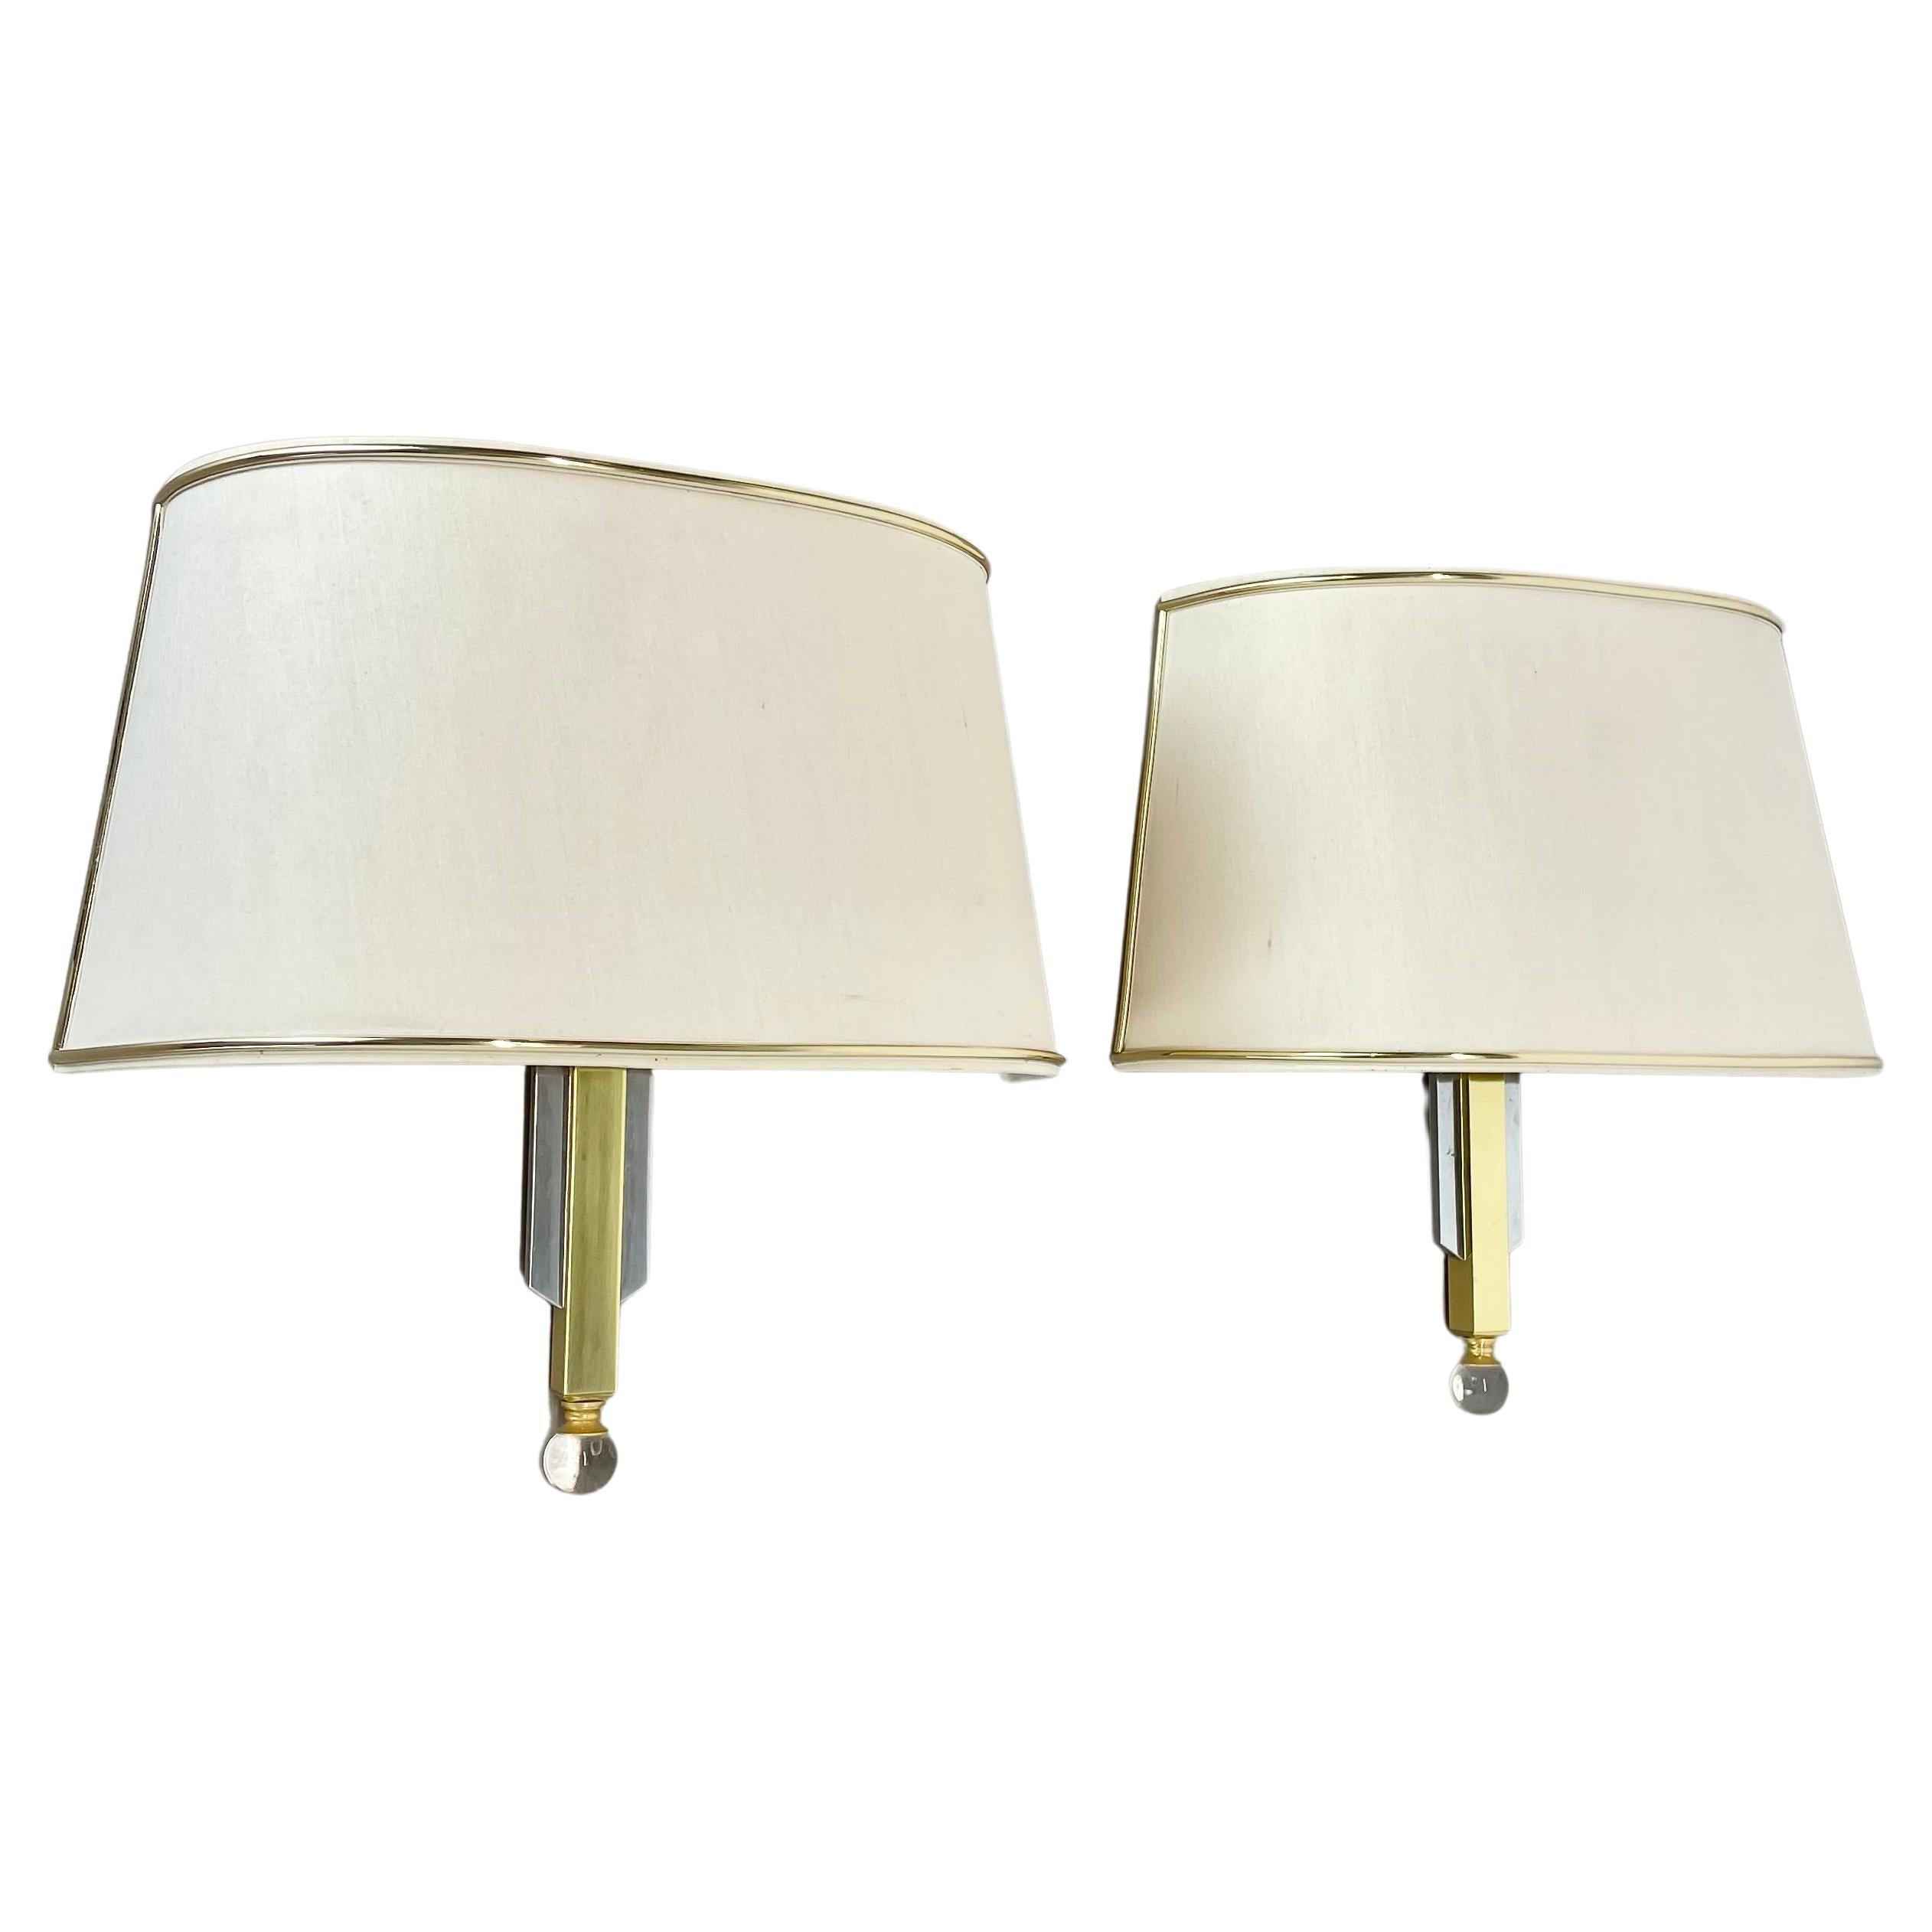 Set of 2 Hollywood Regency Bicolor brass Wall Lights with shades, Italy 1980s